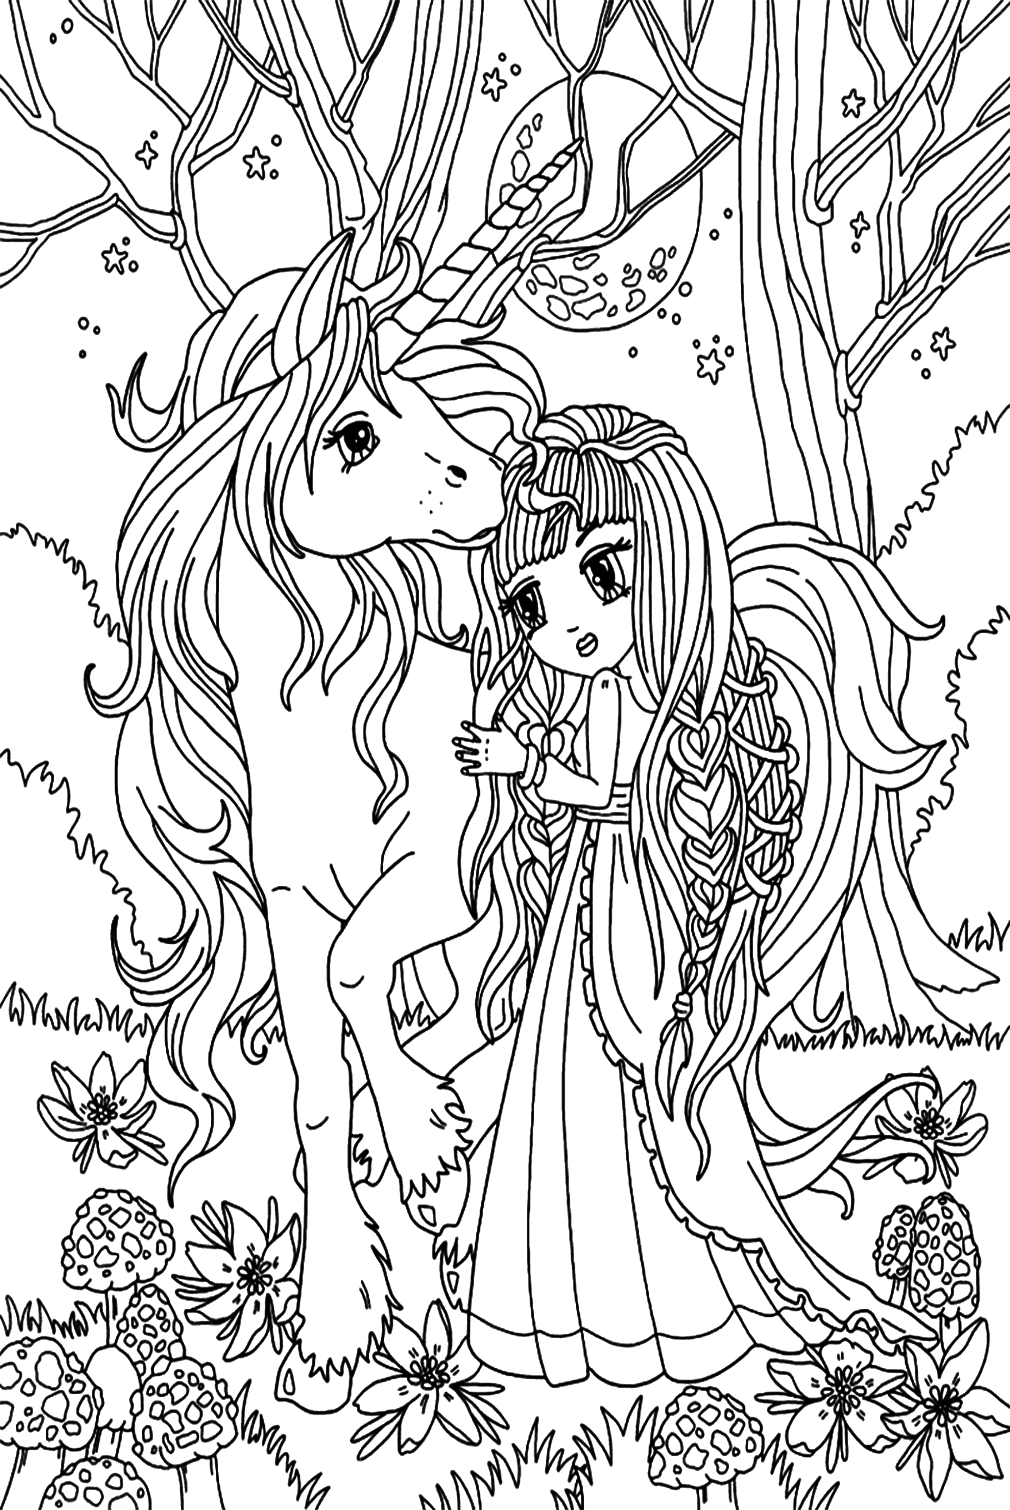 Unicorn With Princess In The Forest Coloring Pages